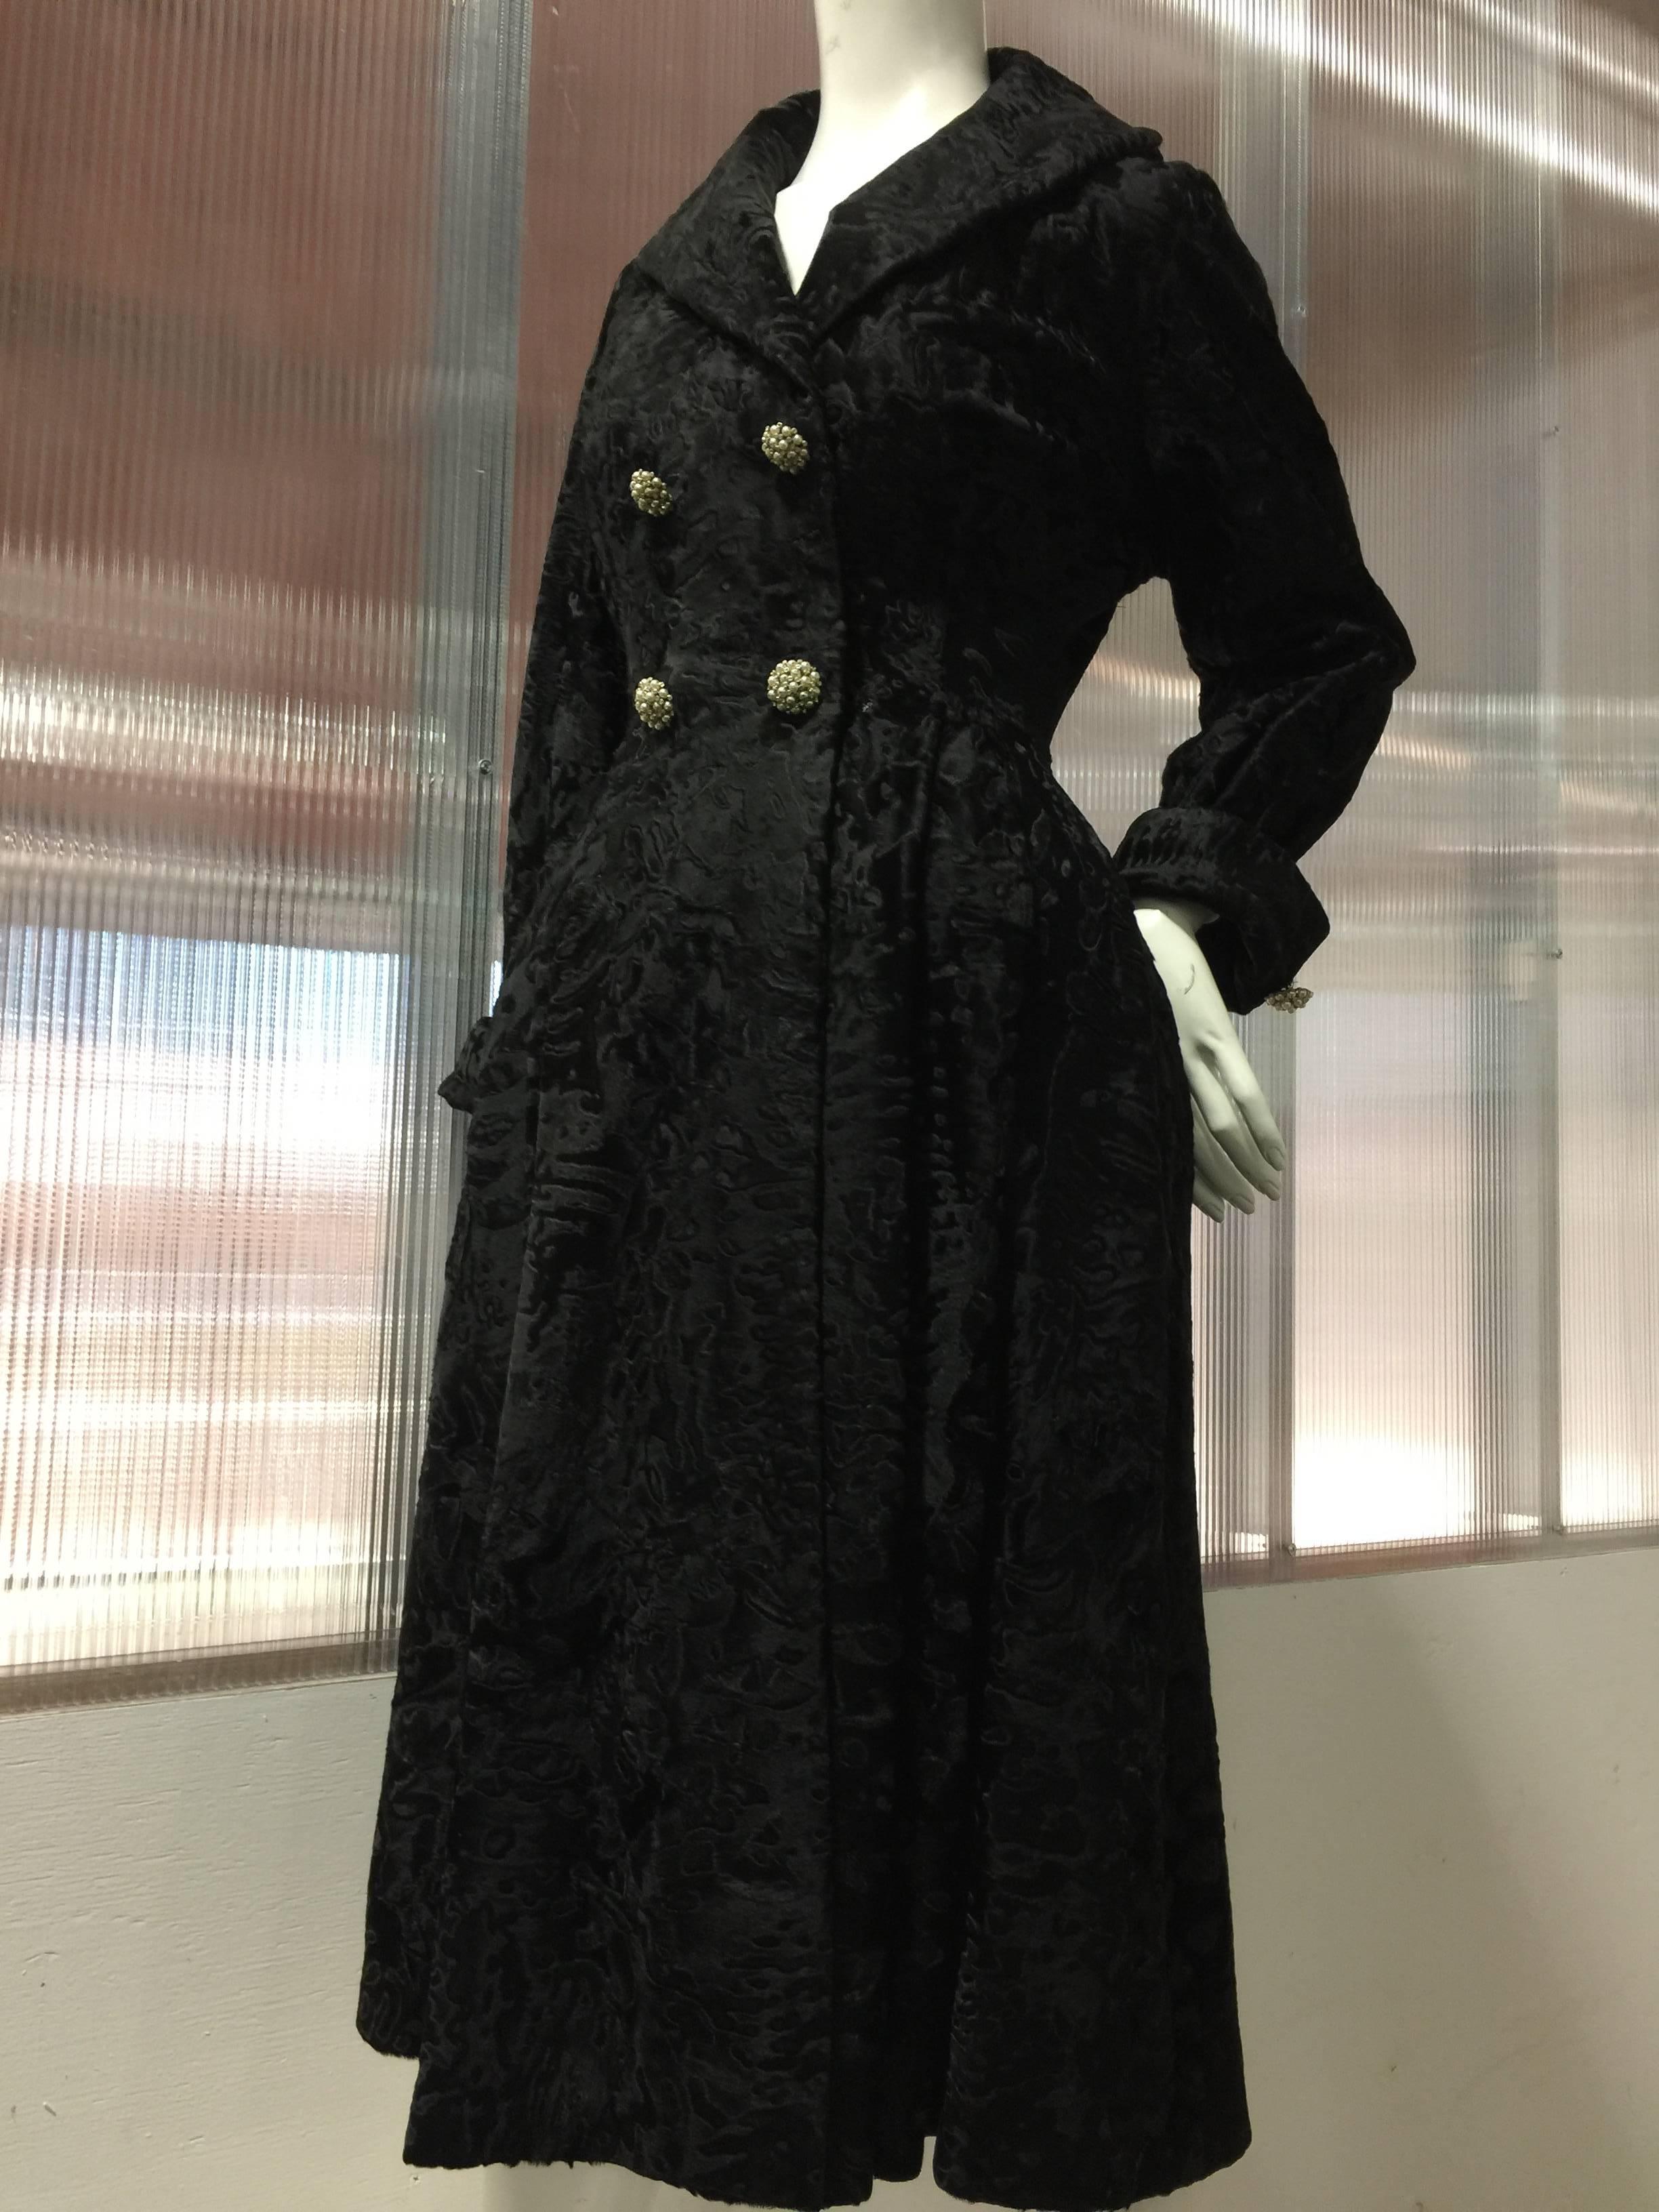 This stunning and rare broadtail fur coat dress by Hattie Carnegie has a dressy and formal nature. The silhoutte is nipped-in at the waist and a pleated back full skirt falling below mid-calf length emphasizes the bust and hips: Quite evident in